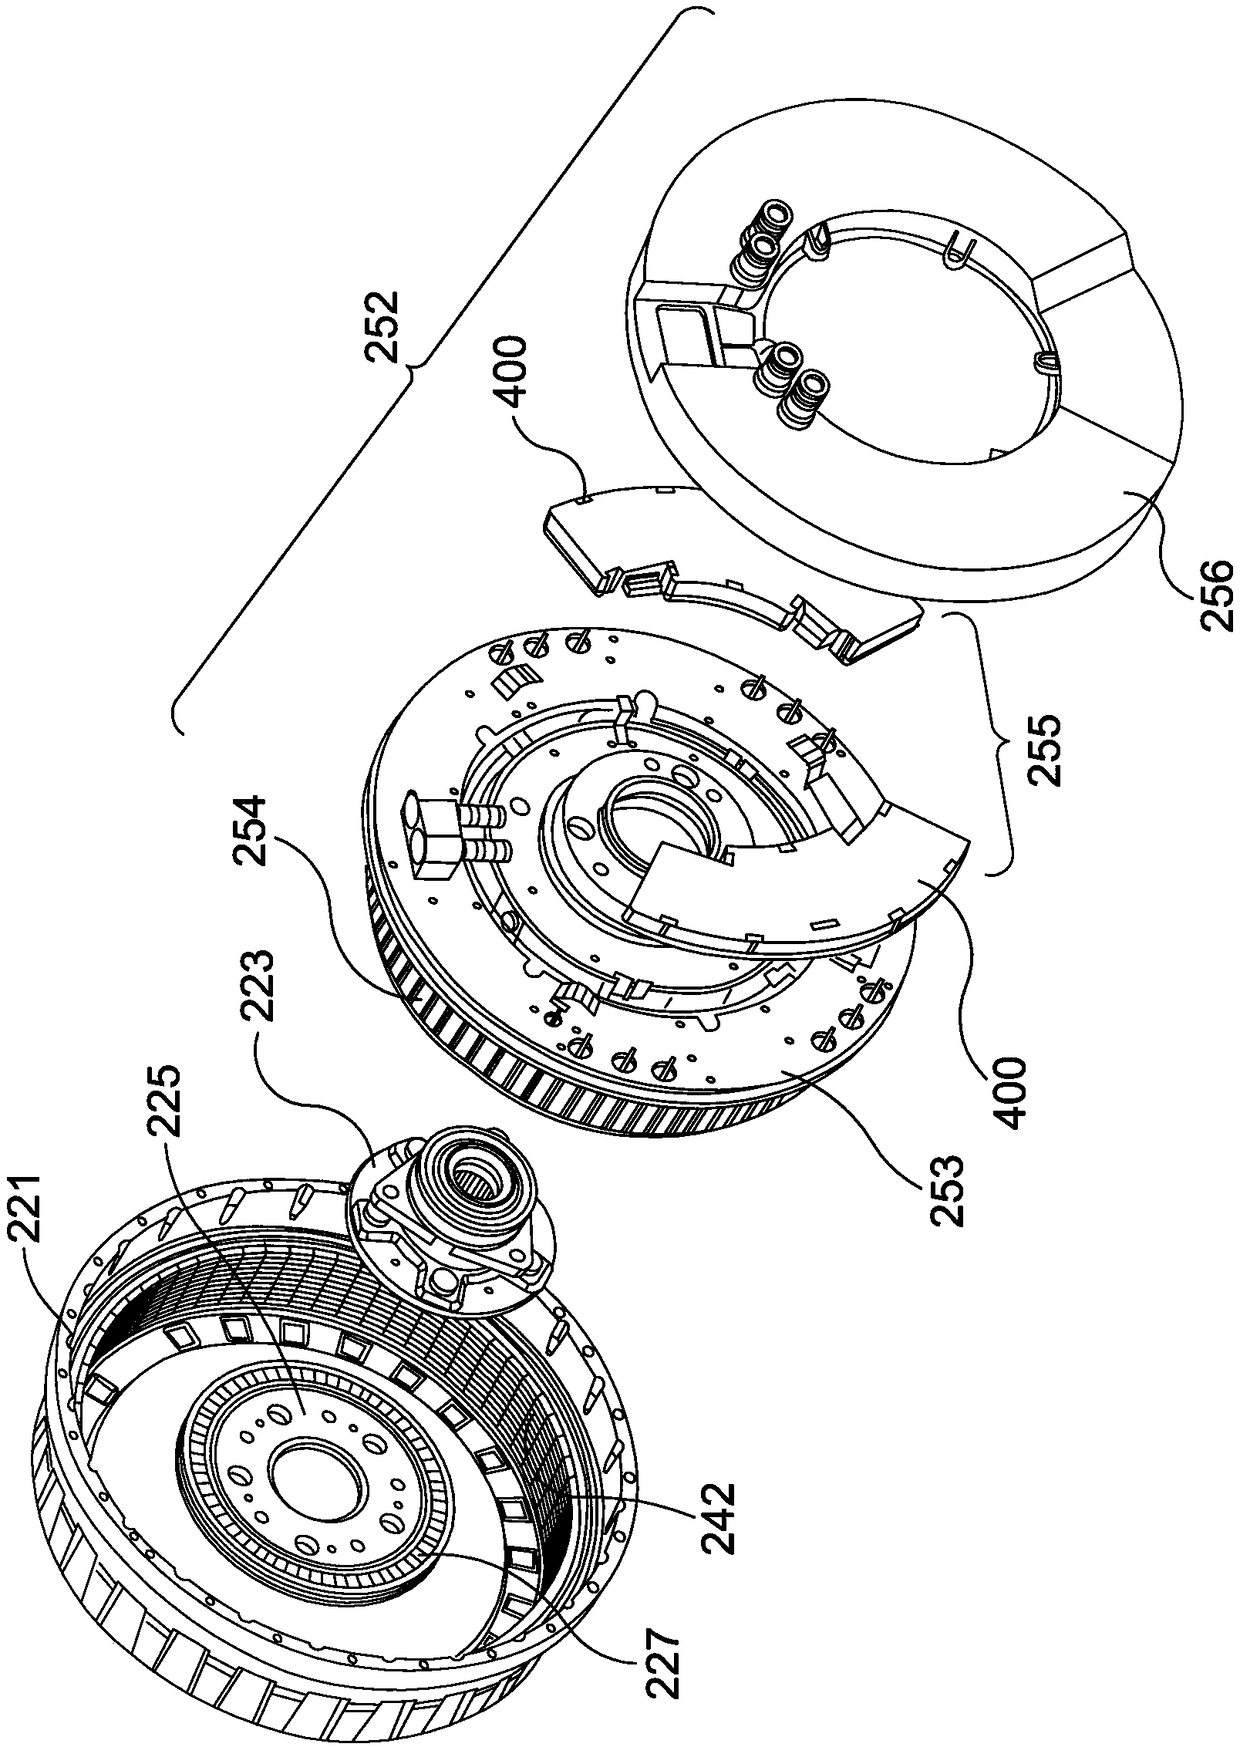 A stator for an electric motor and a method of manufacturing a stator